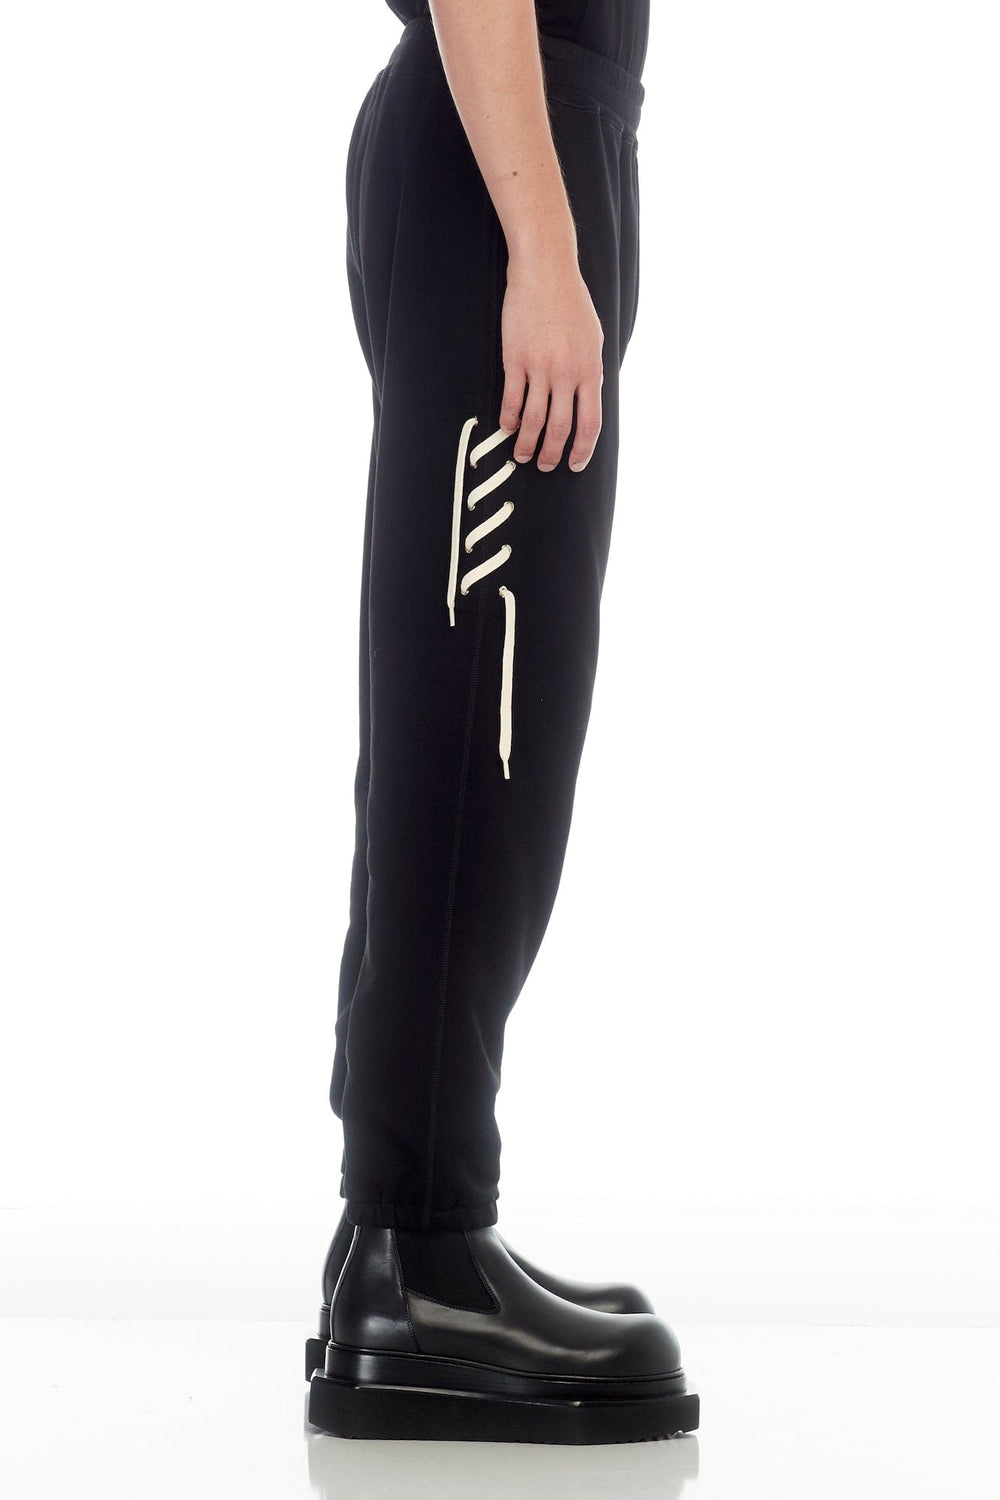 Craig Green Laced Sweatpants FW23 – Antidote Fashion and Lifestyle